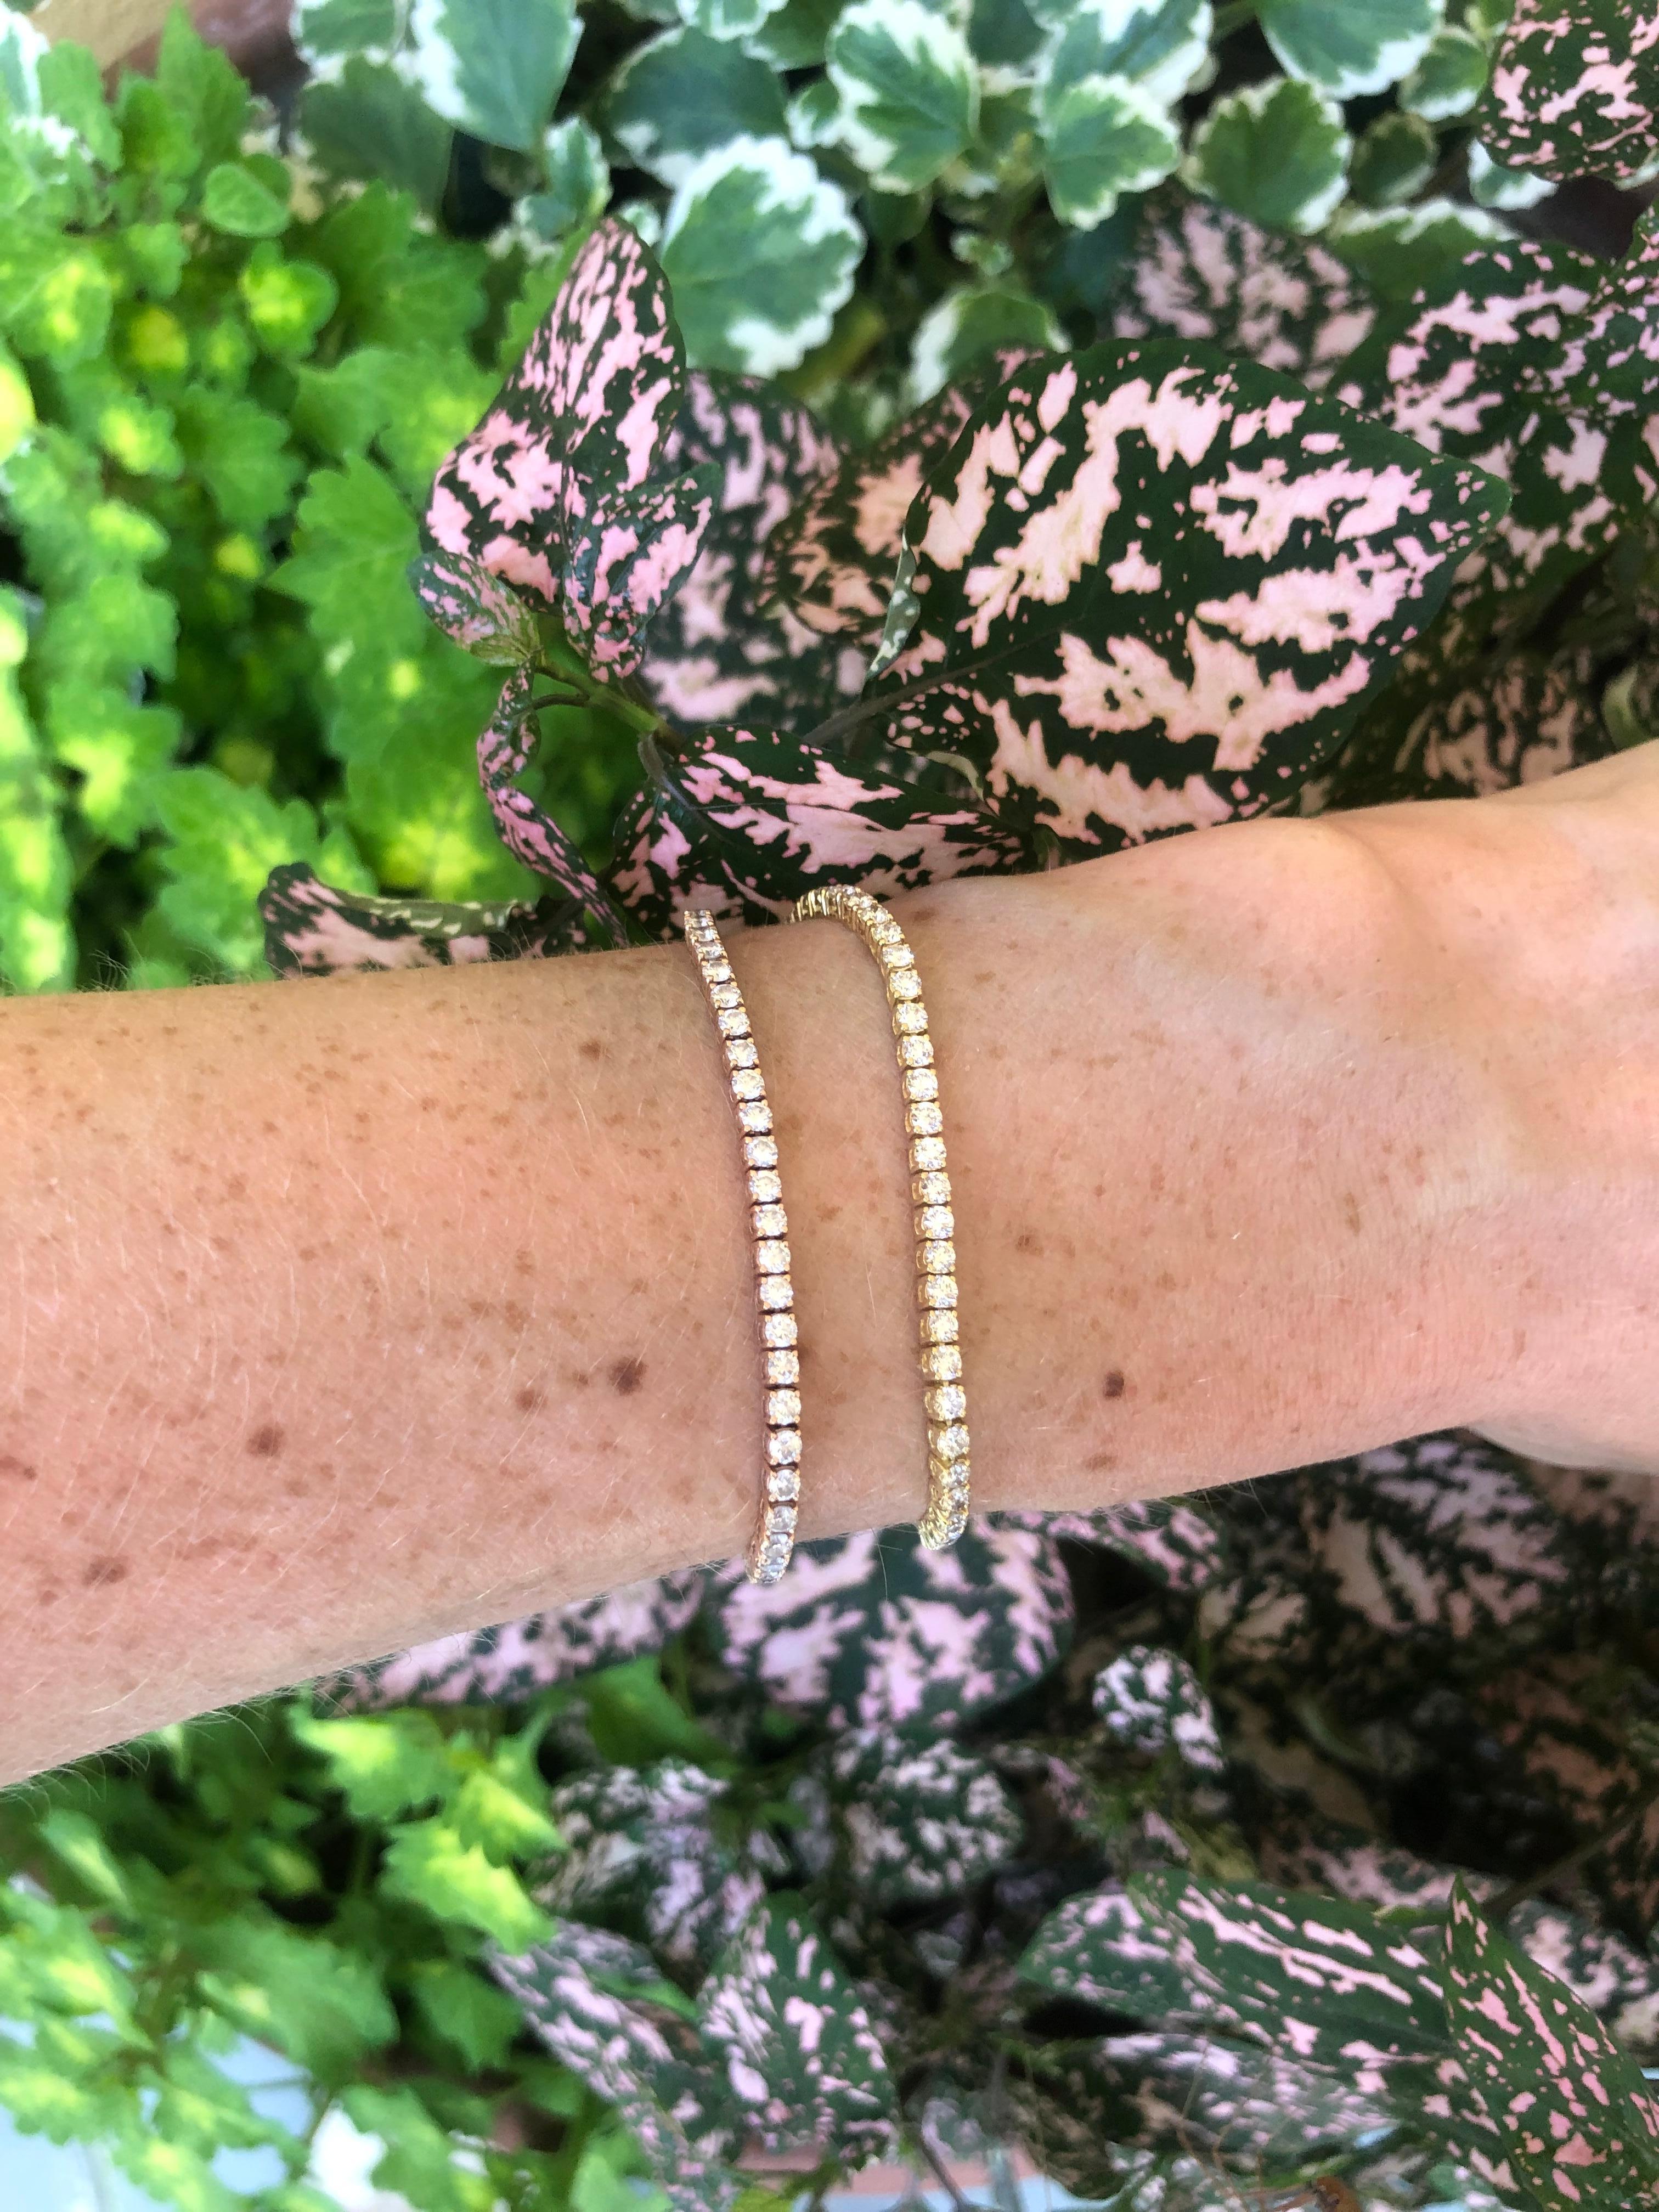 Whether you're hitting the courts or just dressing up for a night out, this diamond tennis bracelet is a chic accessory that will take your look to the next level. Made with GH SI1 diamonds set in yellow gold, it's a timeless piece that will add